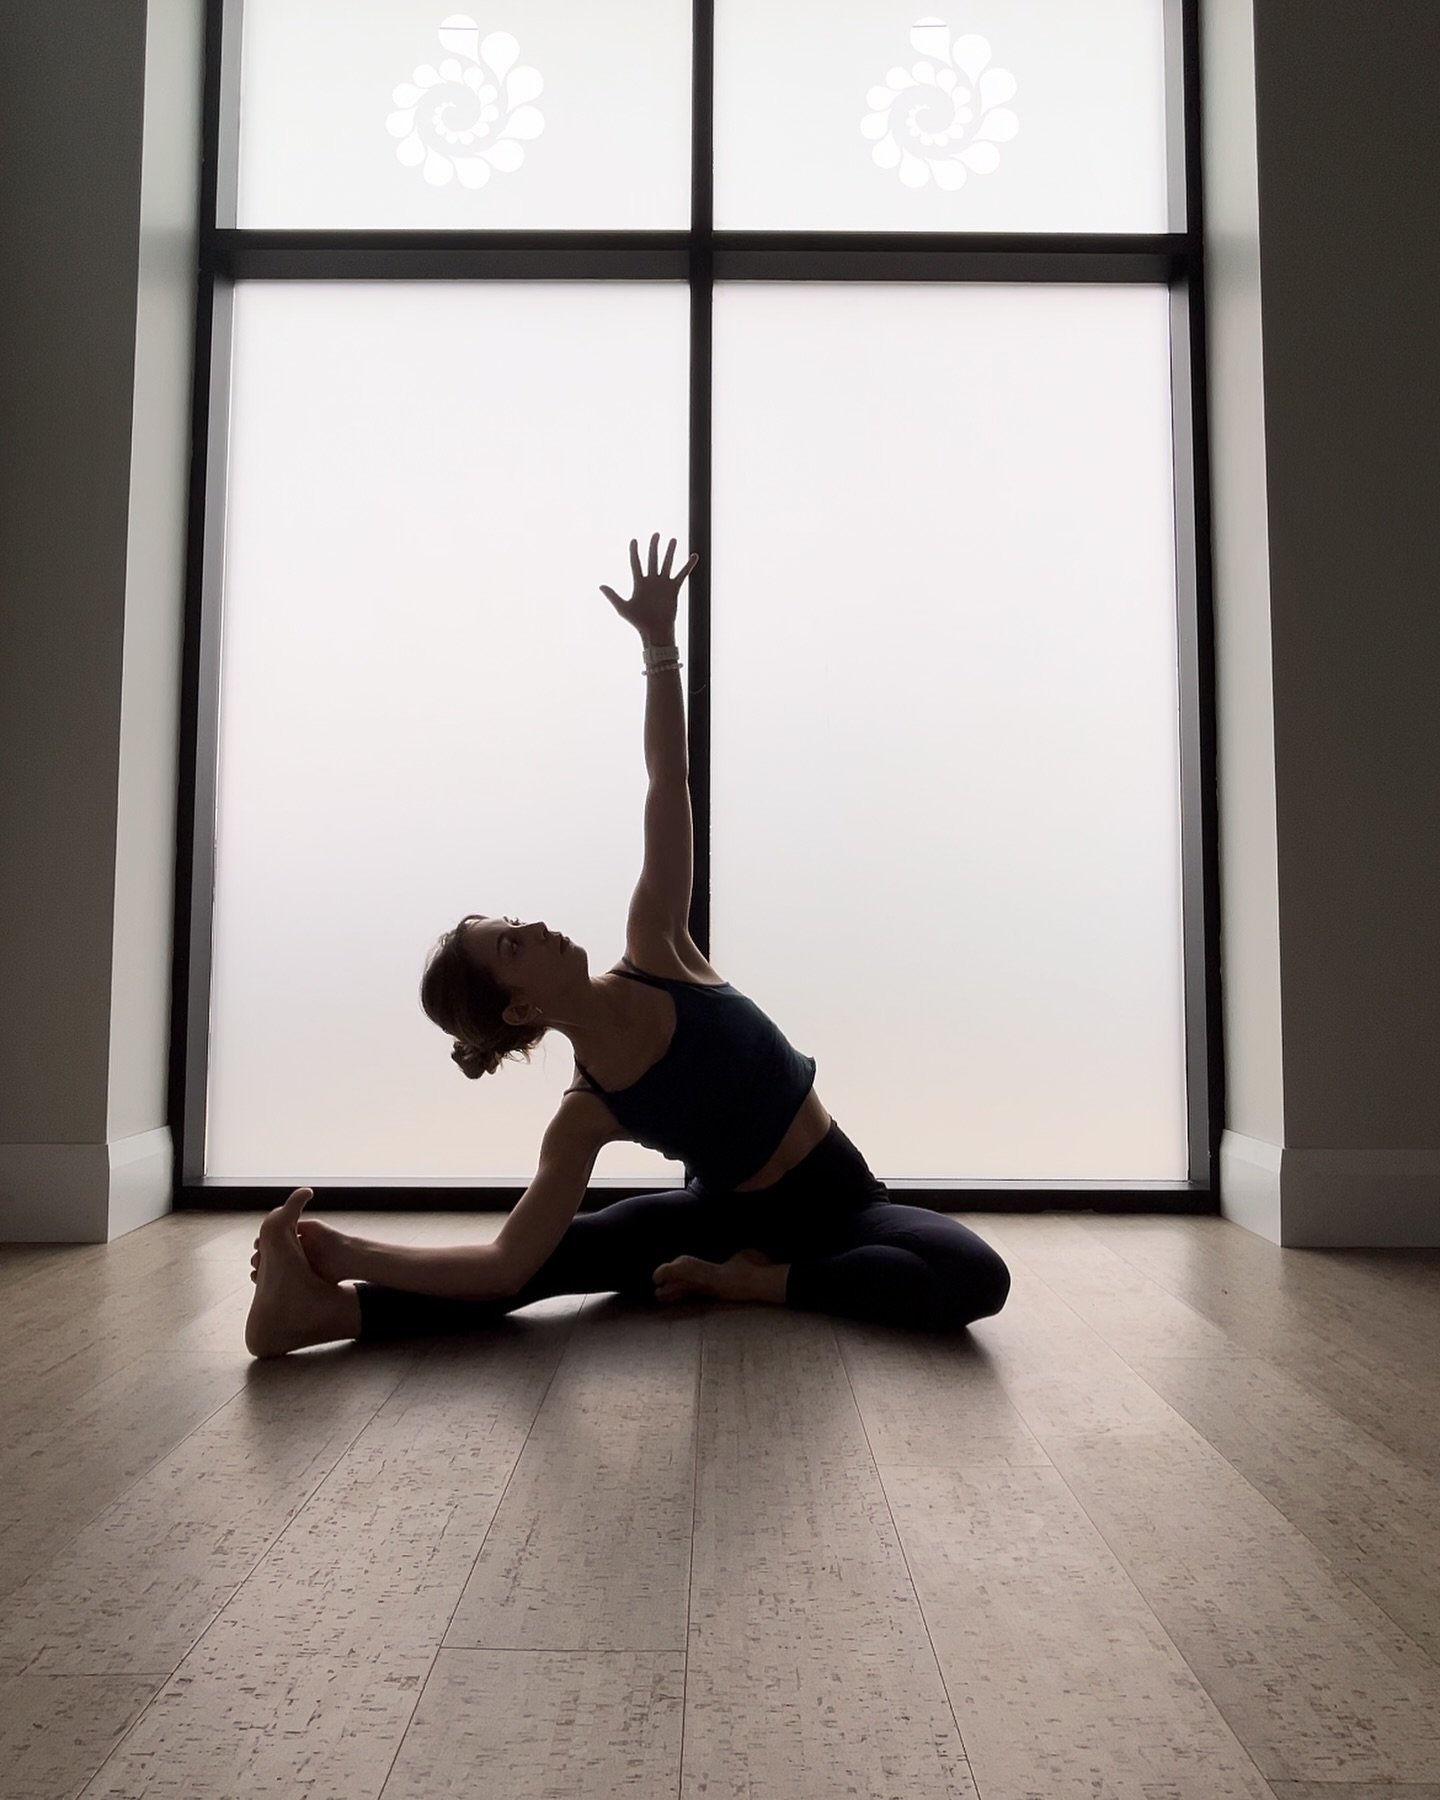 Looking to add some movement and yoga into your routine? We have just the thing. 

Our Introductory Fortnight is the perfect way to get started with us:

✅ Regain flexibility
✅ Build strength
✅ Destress at the end of a long day

$49 + HST, unlimited 